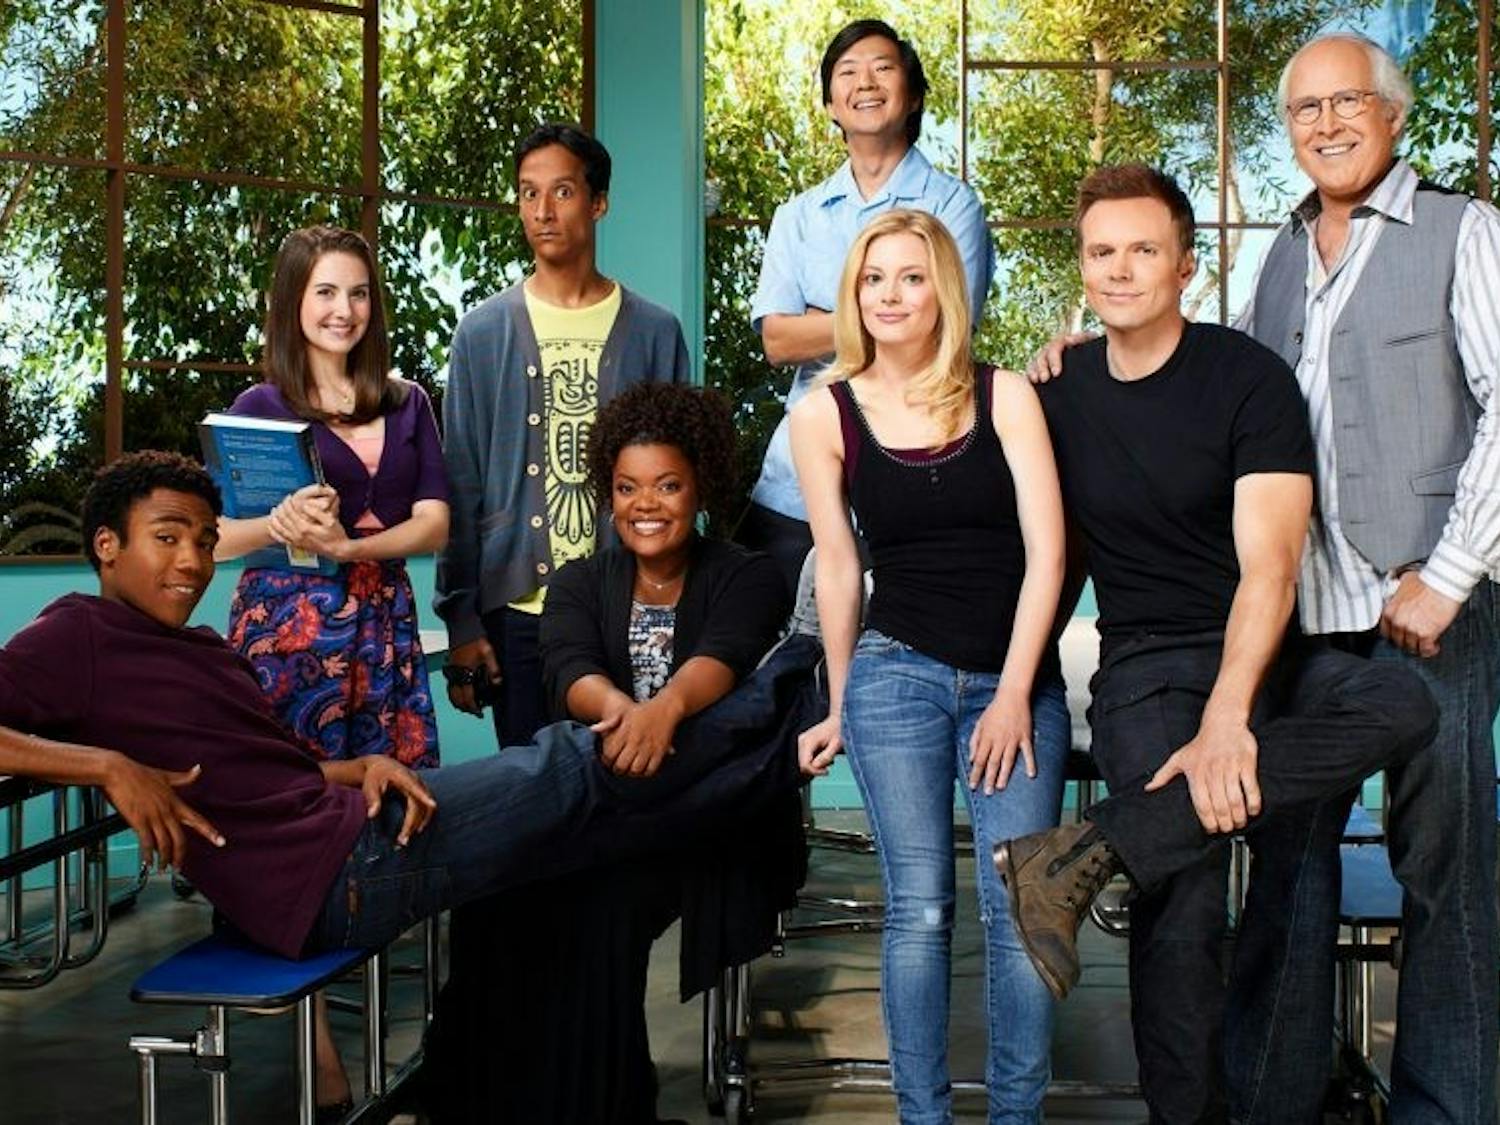 The characters of “Community” grow from study group to family in their comedic adventures.